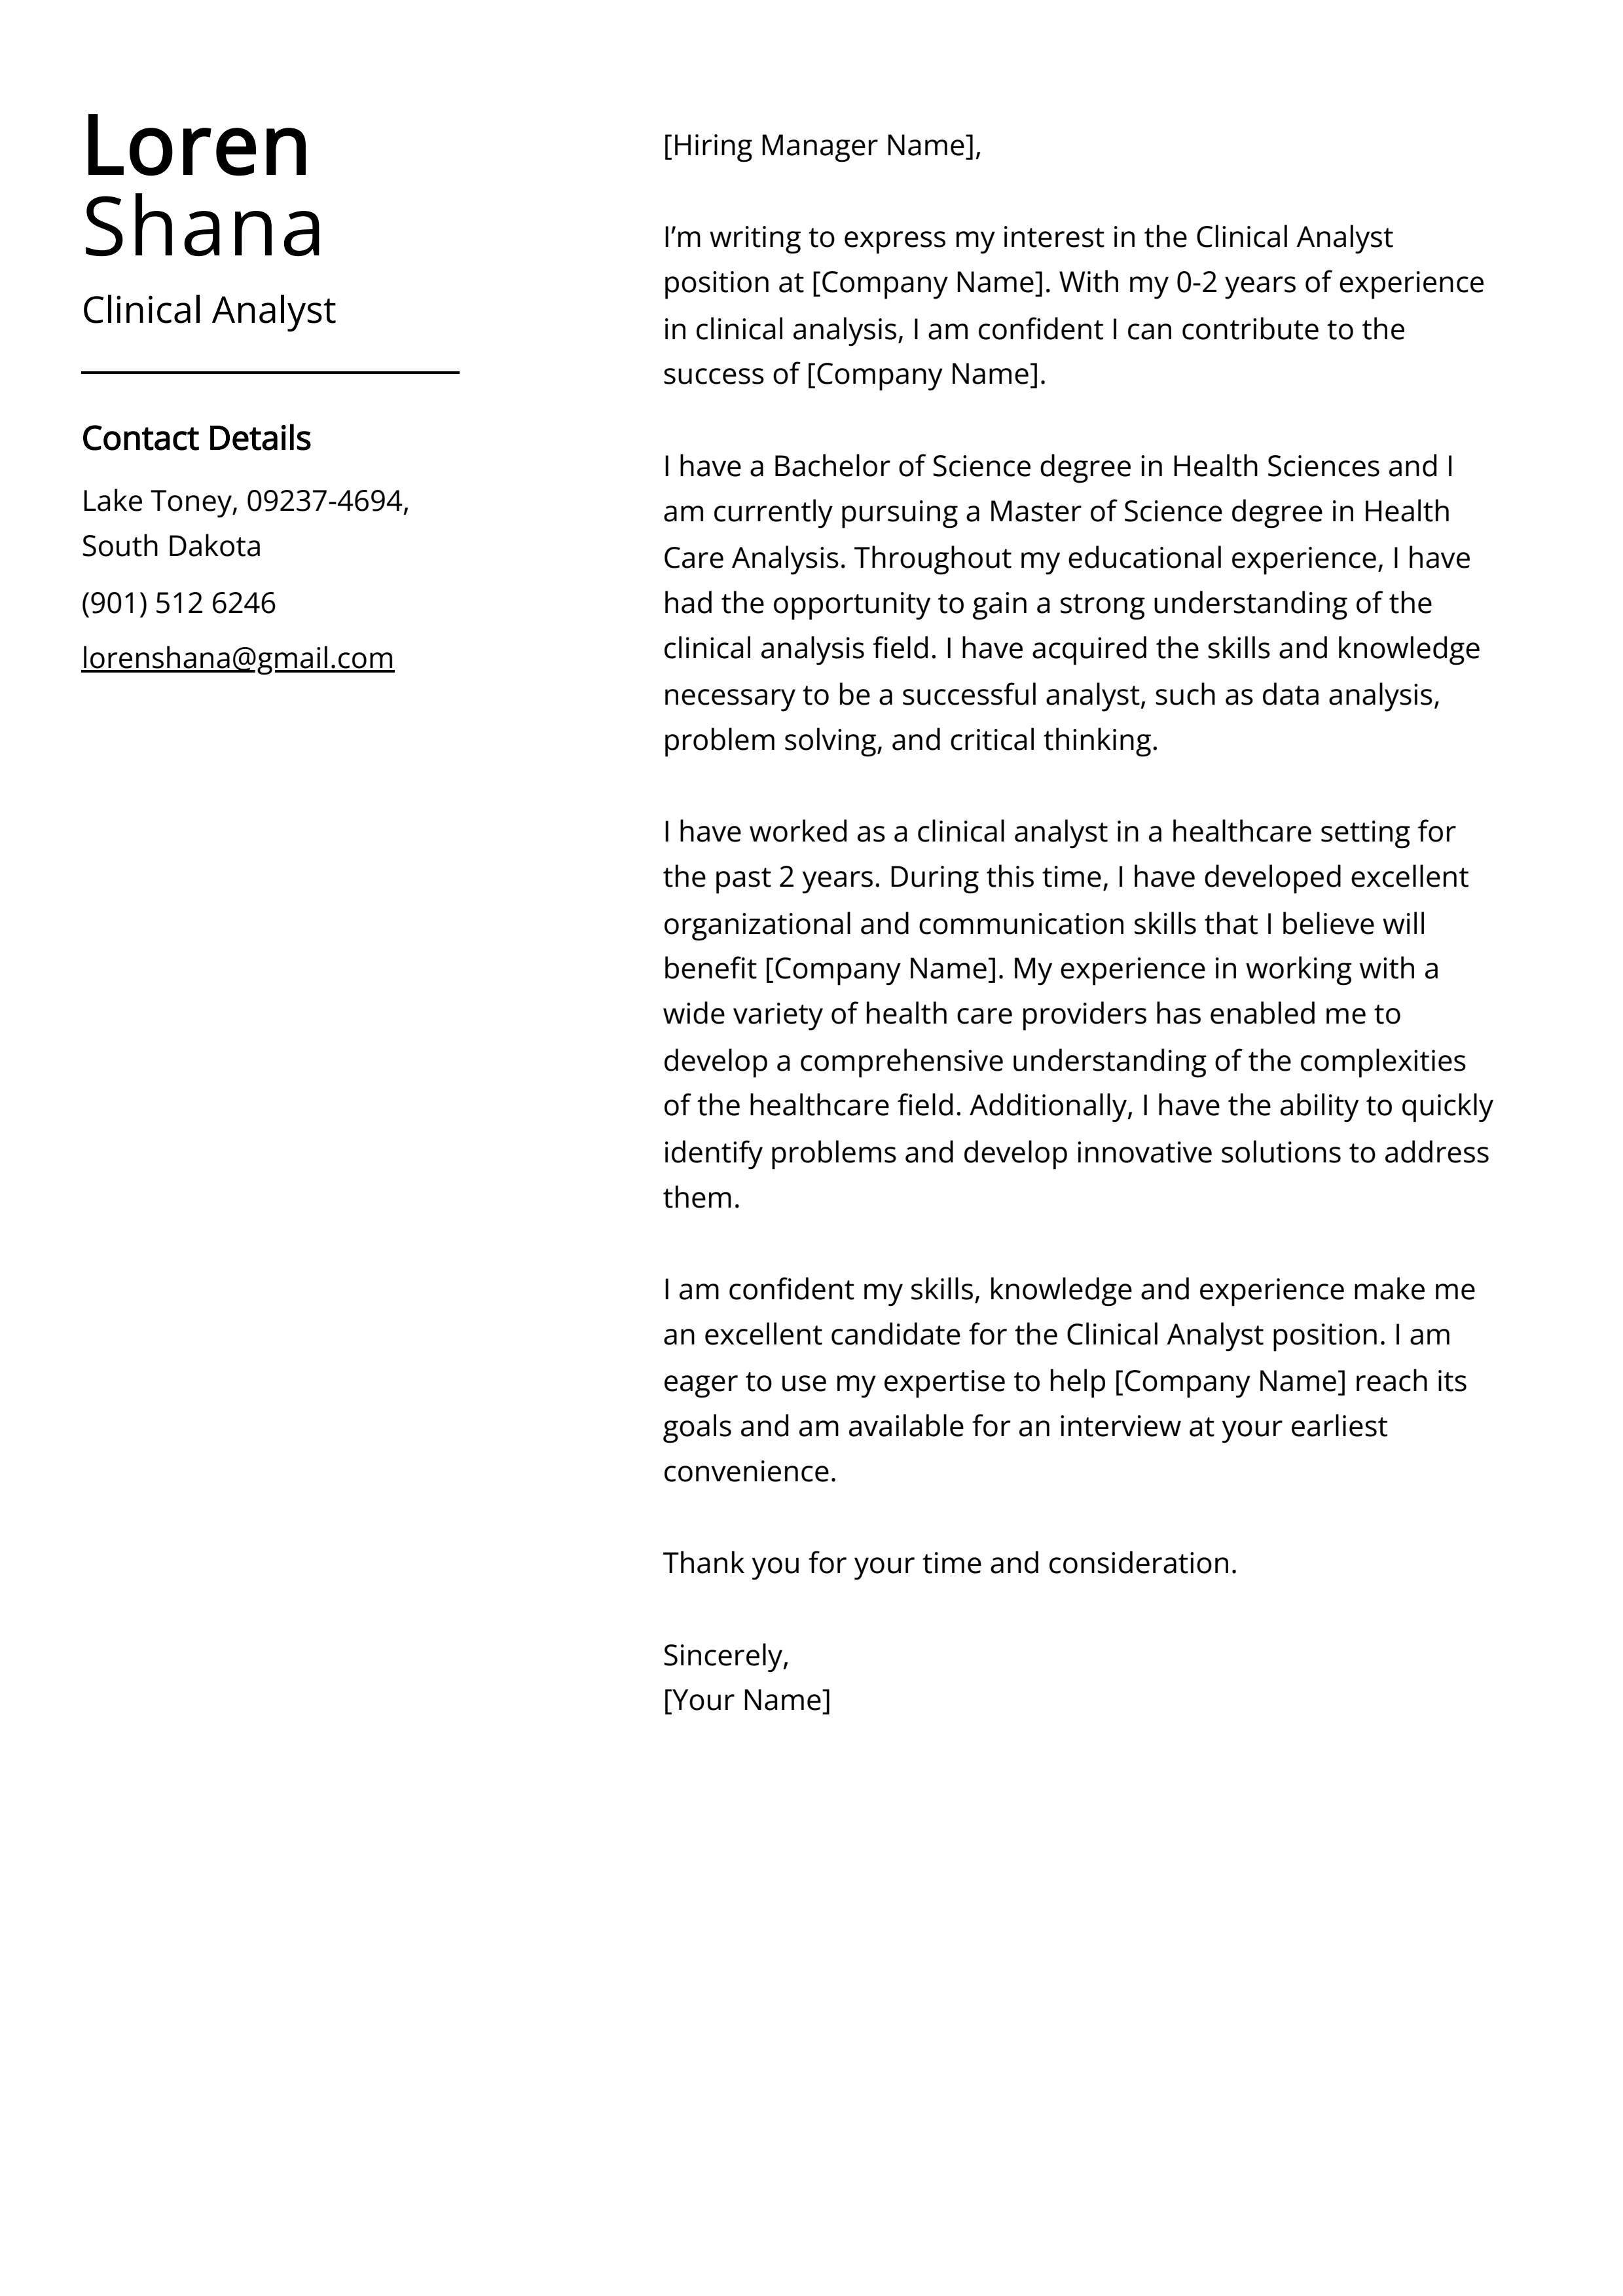 Clinical Analyst Cover Letter Example